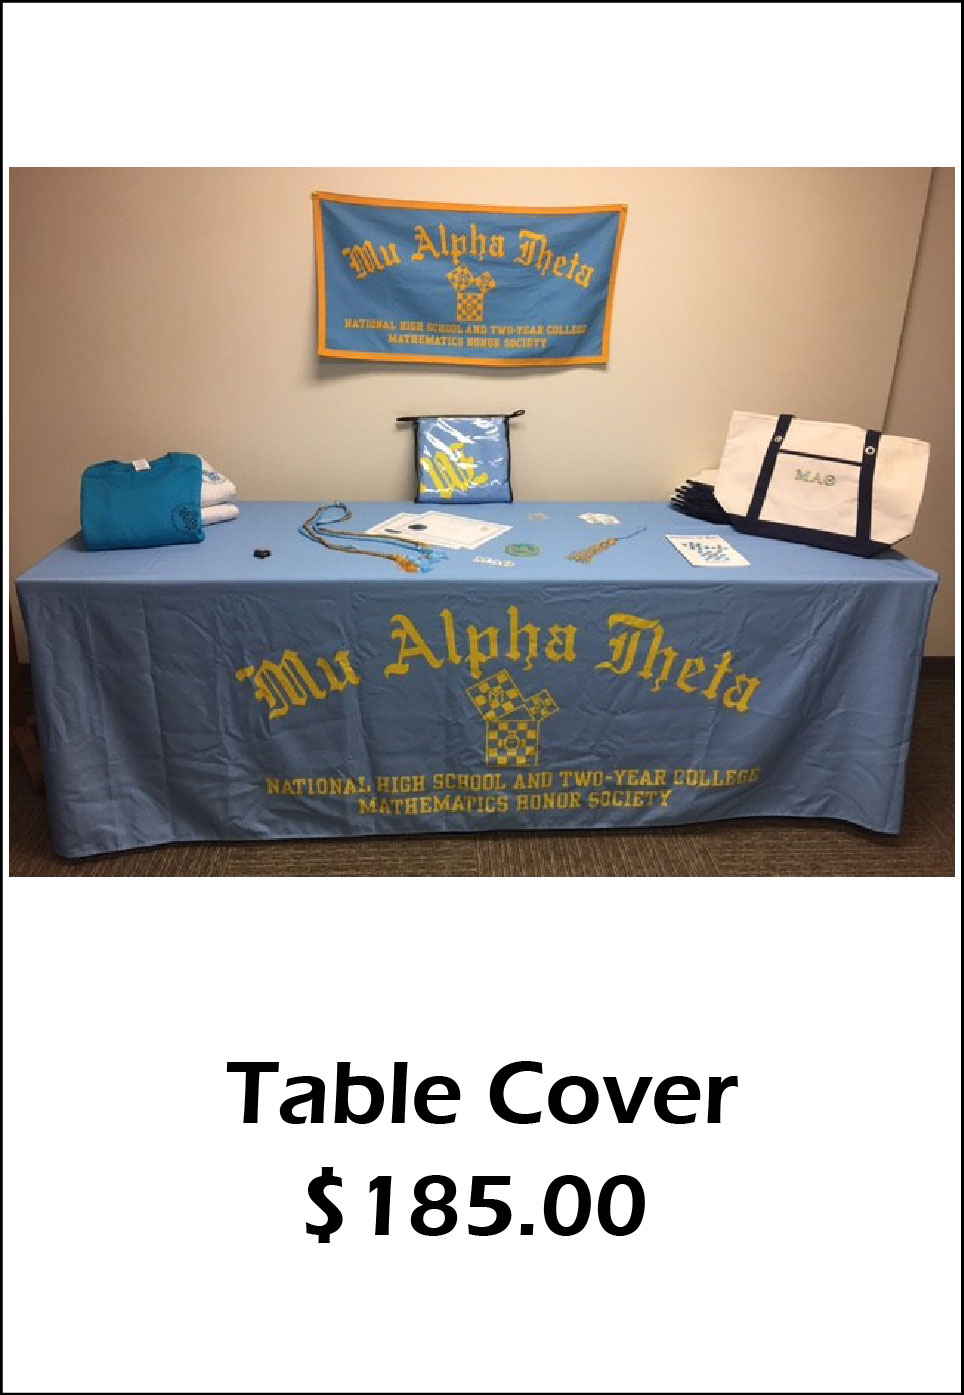 MAT Table Cover - $185